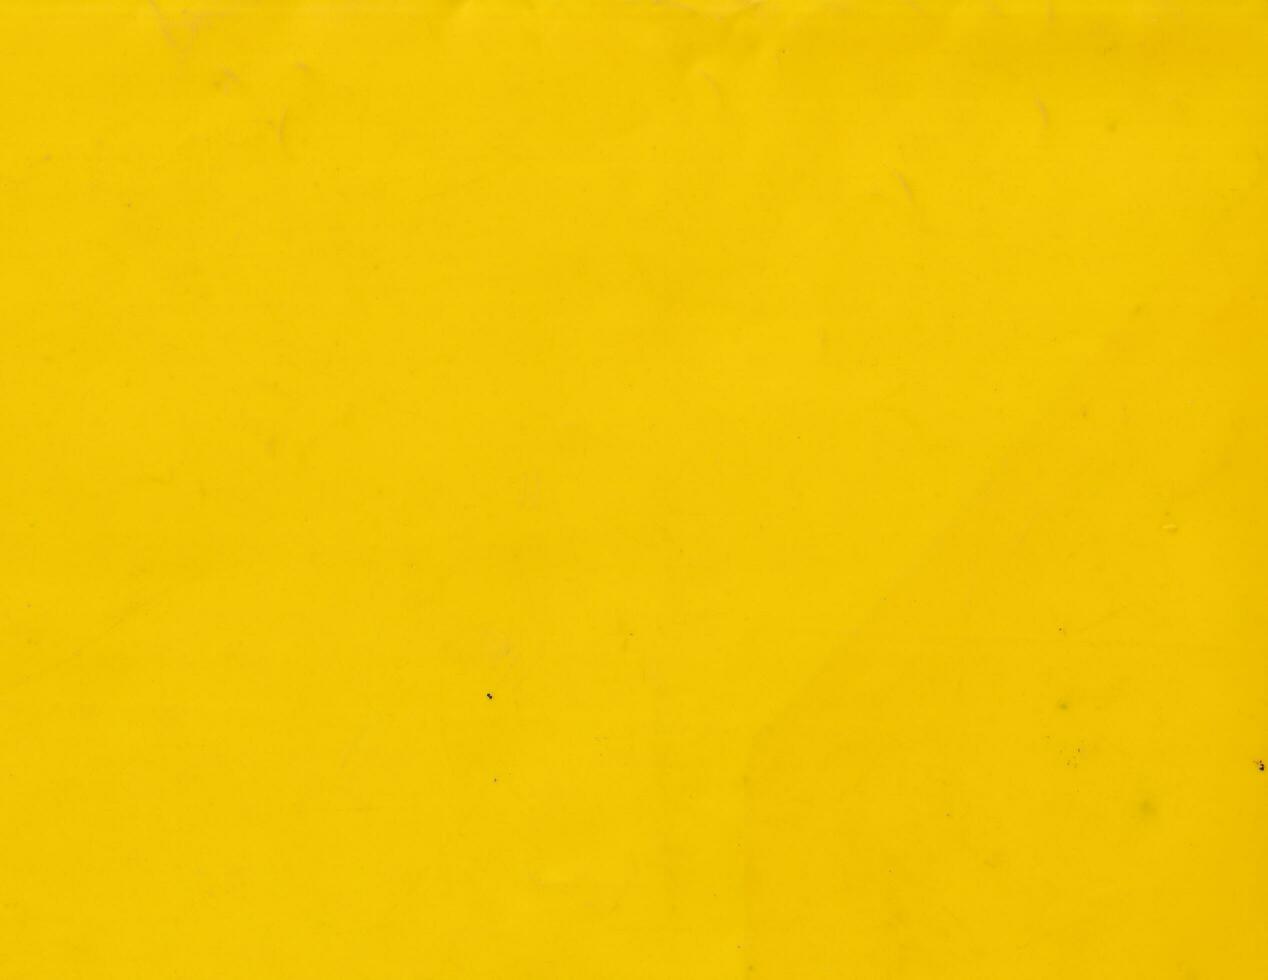 Grunge yellow plastic background template. Smooth and vibrant surface texture. photo